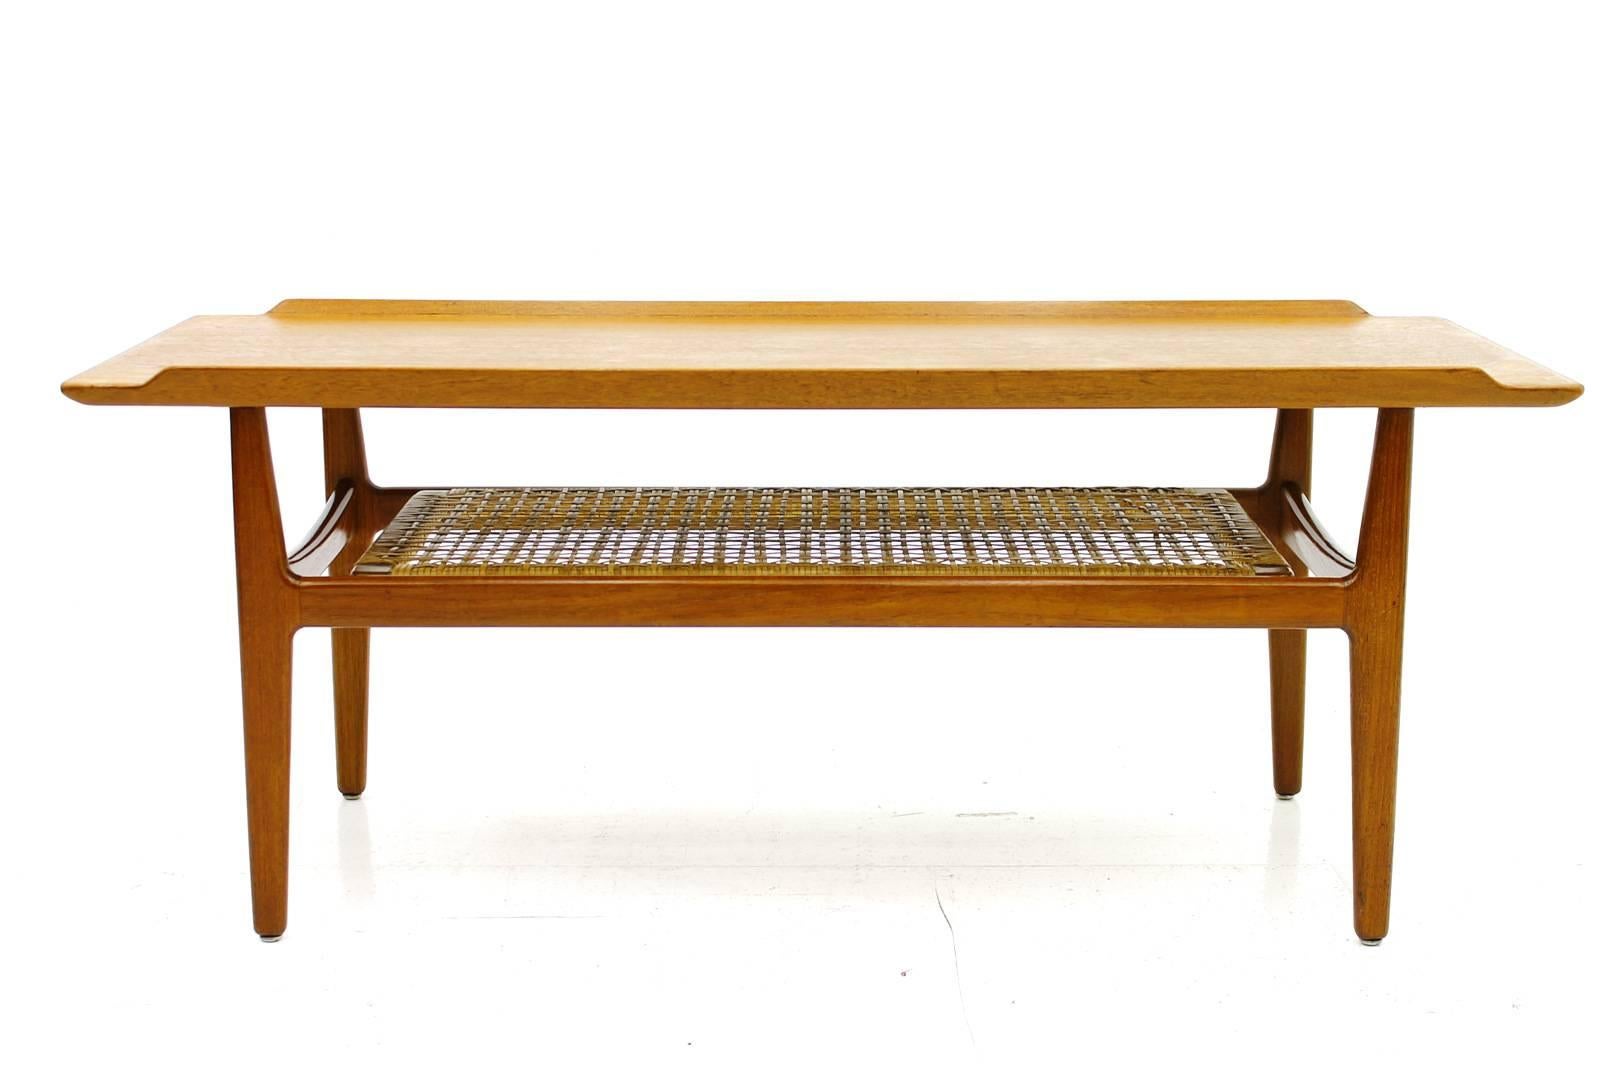 A beautiful danish sofa table by Arne Vodder, 